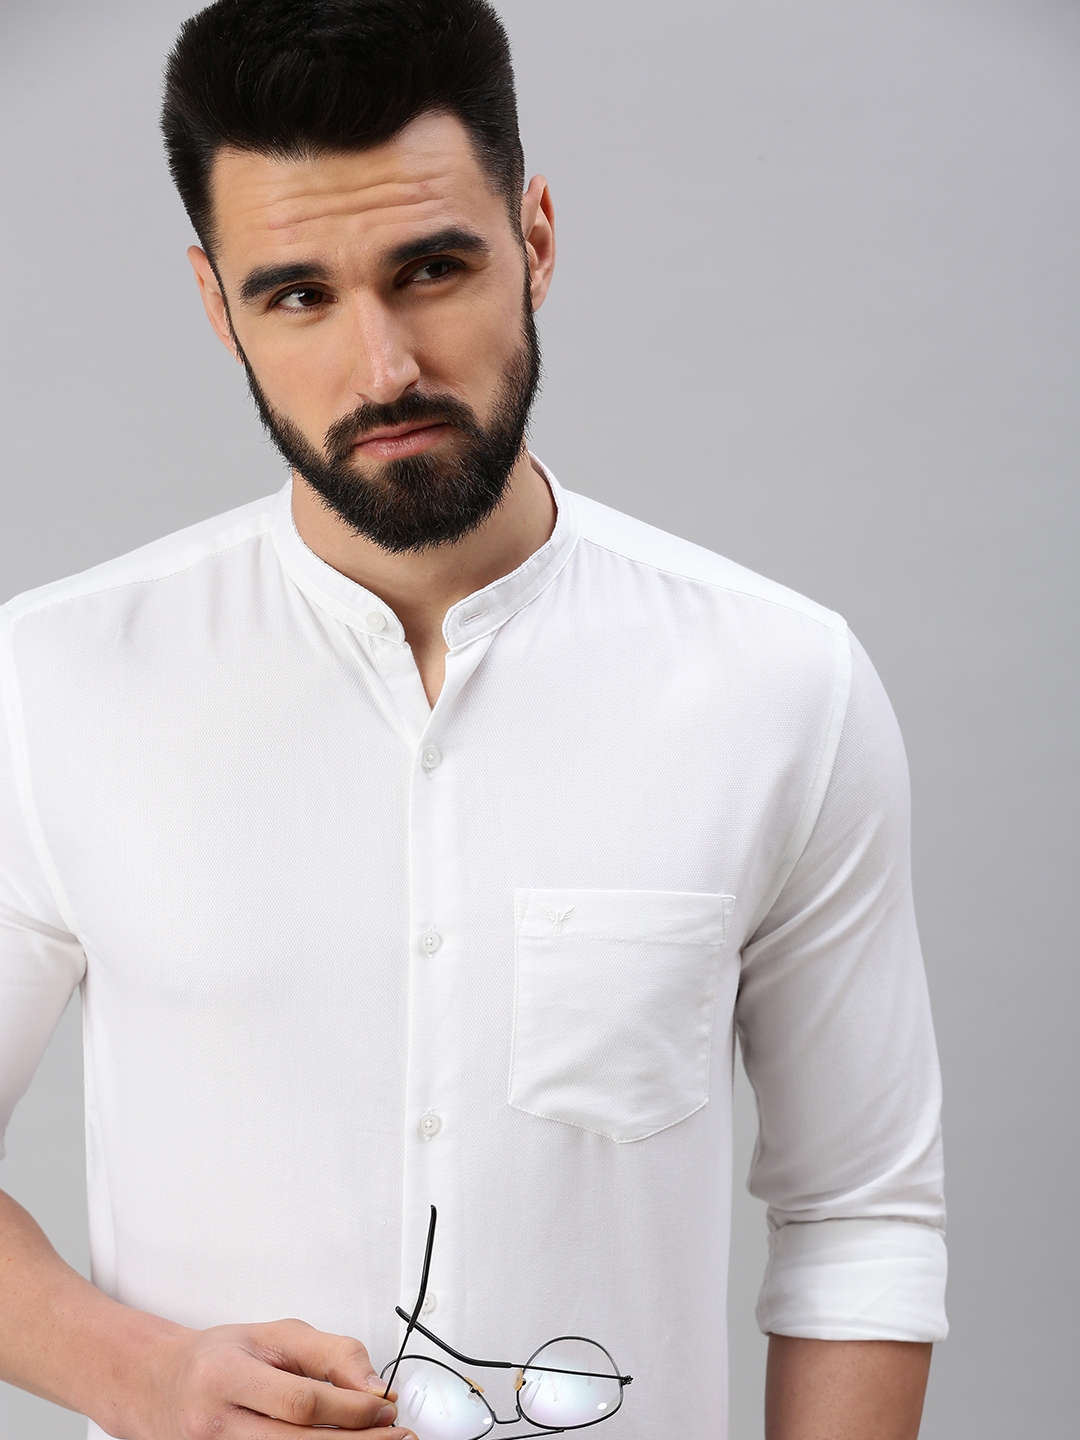 Men's White Polycotton Solid Casual Shirts